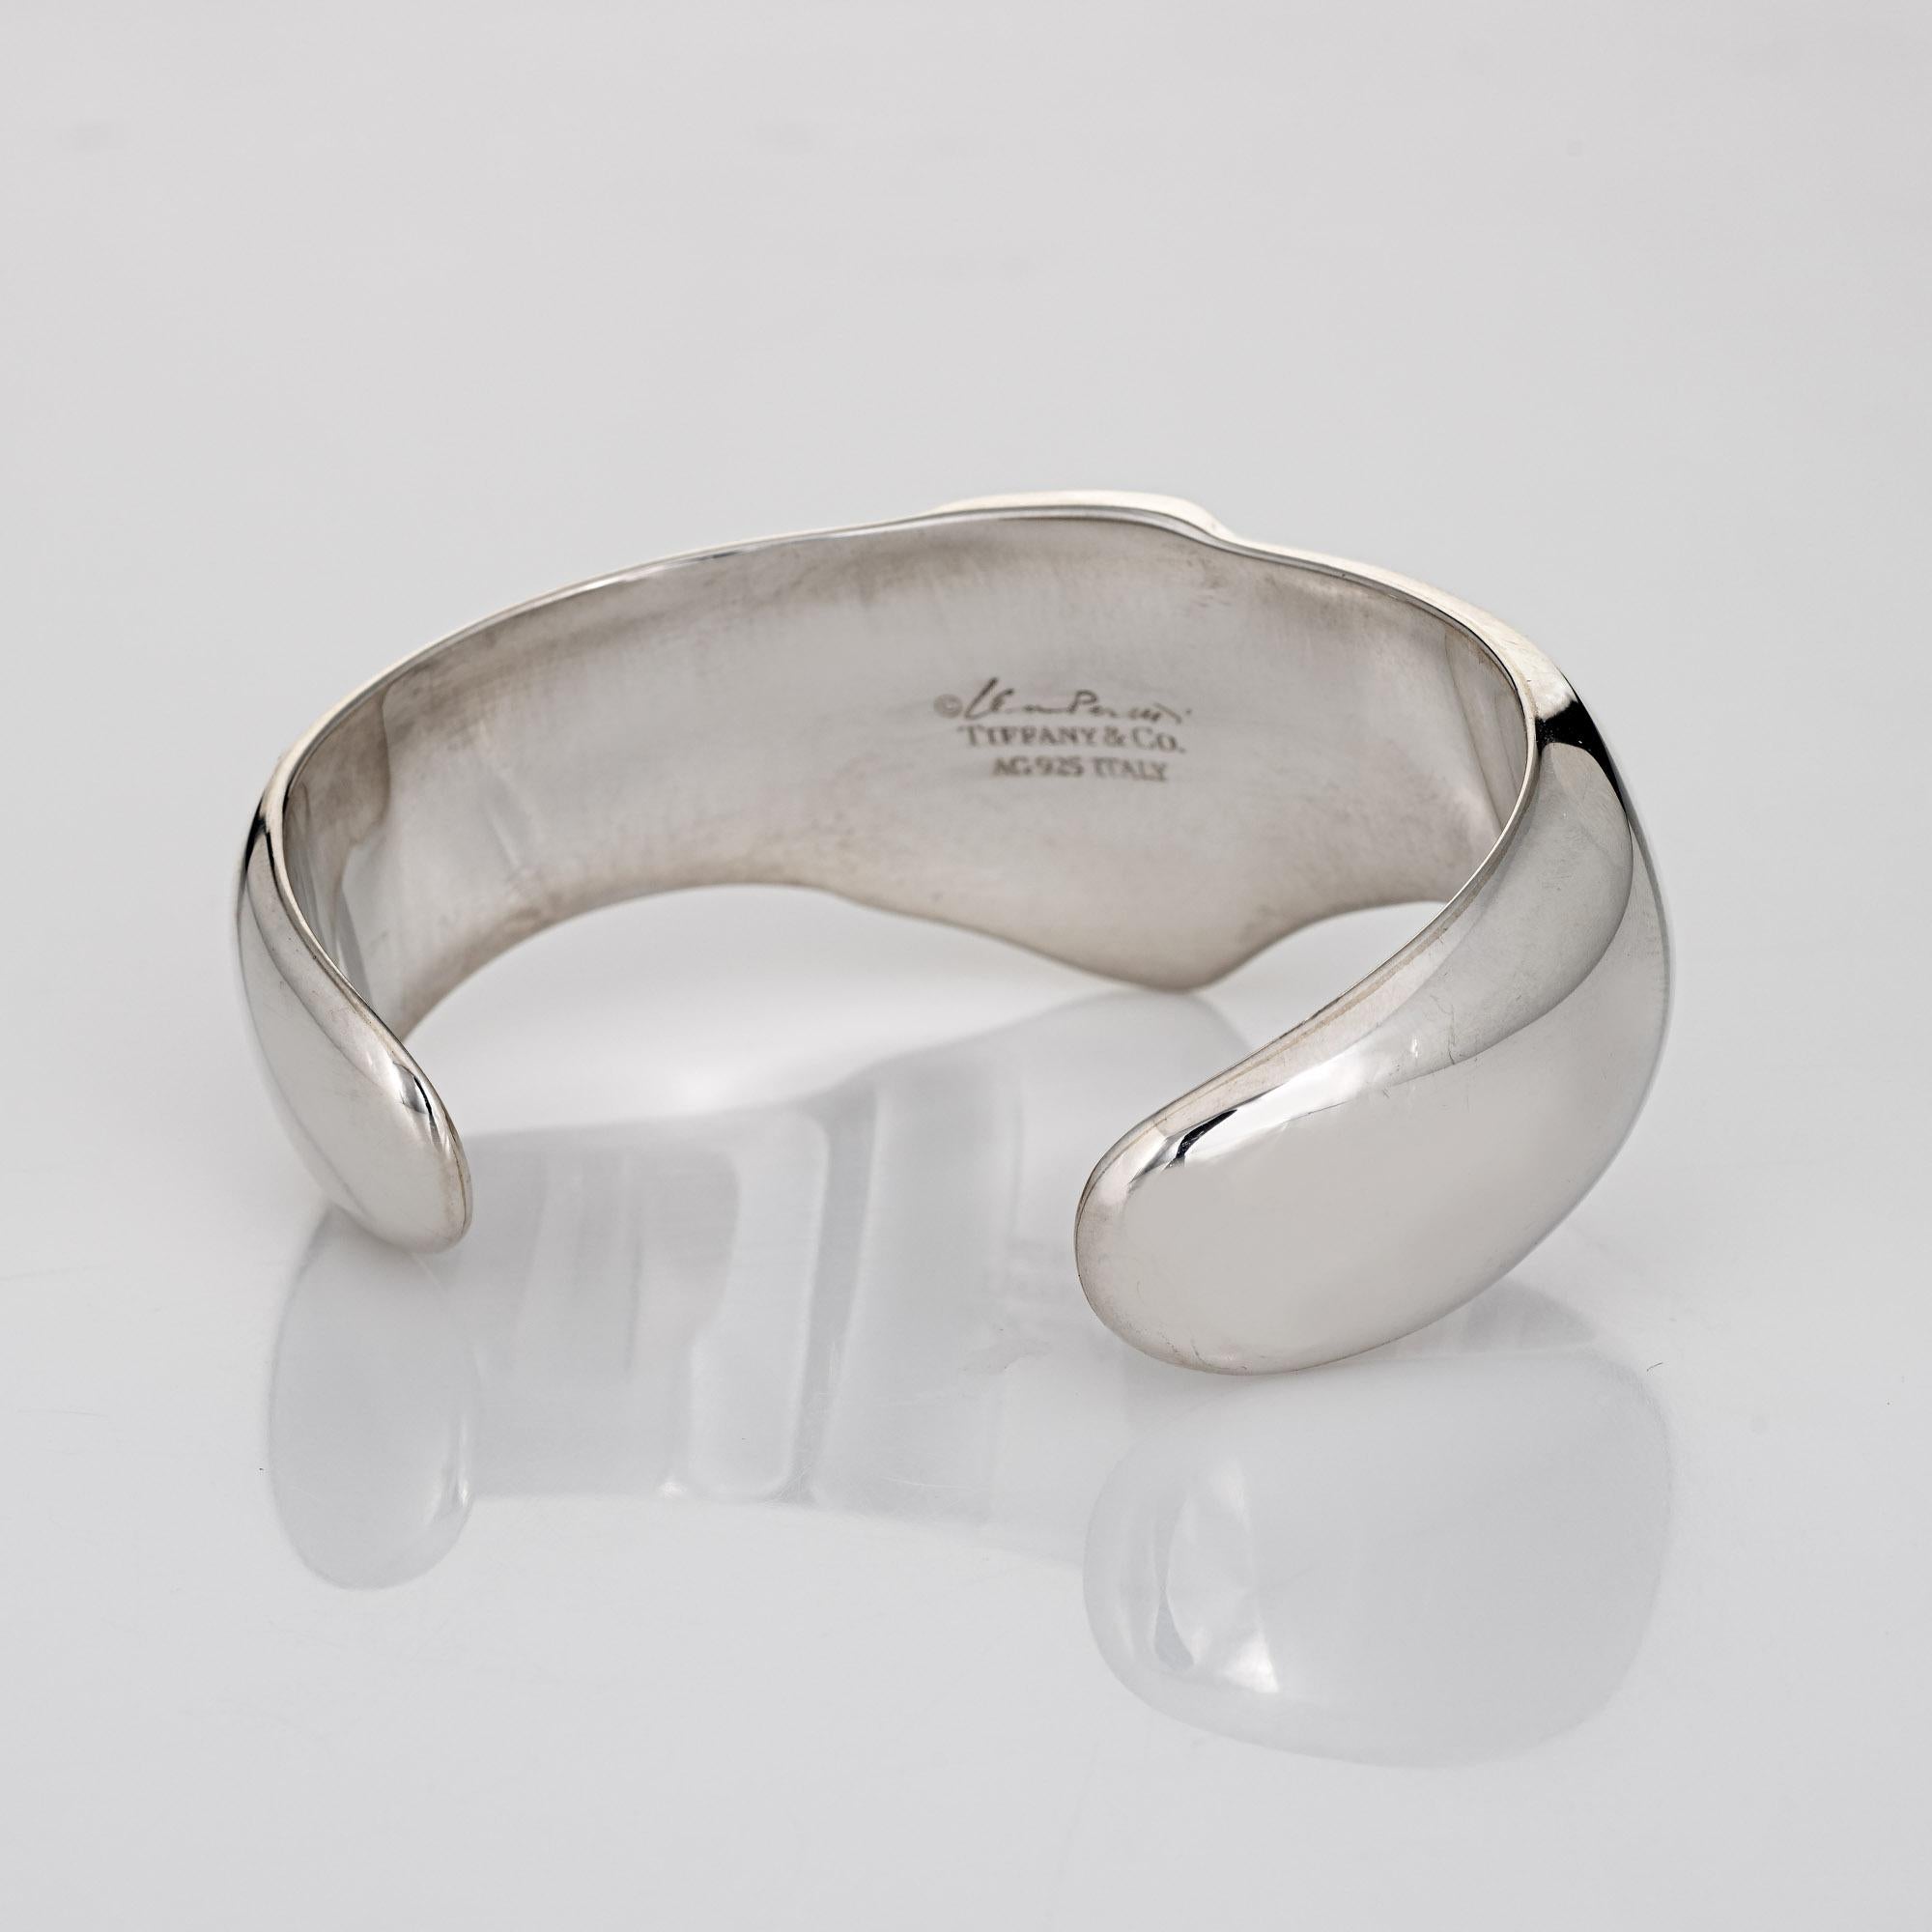 Stylish and finely detailed estate Tiffany & Co flat knot cuff bracelet, crafted in sterling silver.  

The flat knot cuff bracelet is wide (28mm - 1.10 inches) and makes a great statement on the wrist. The bracelet is designed to fit a wrist up to